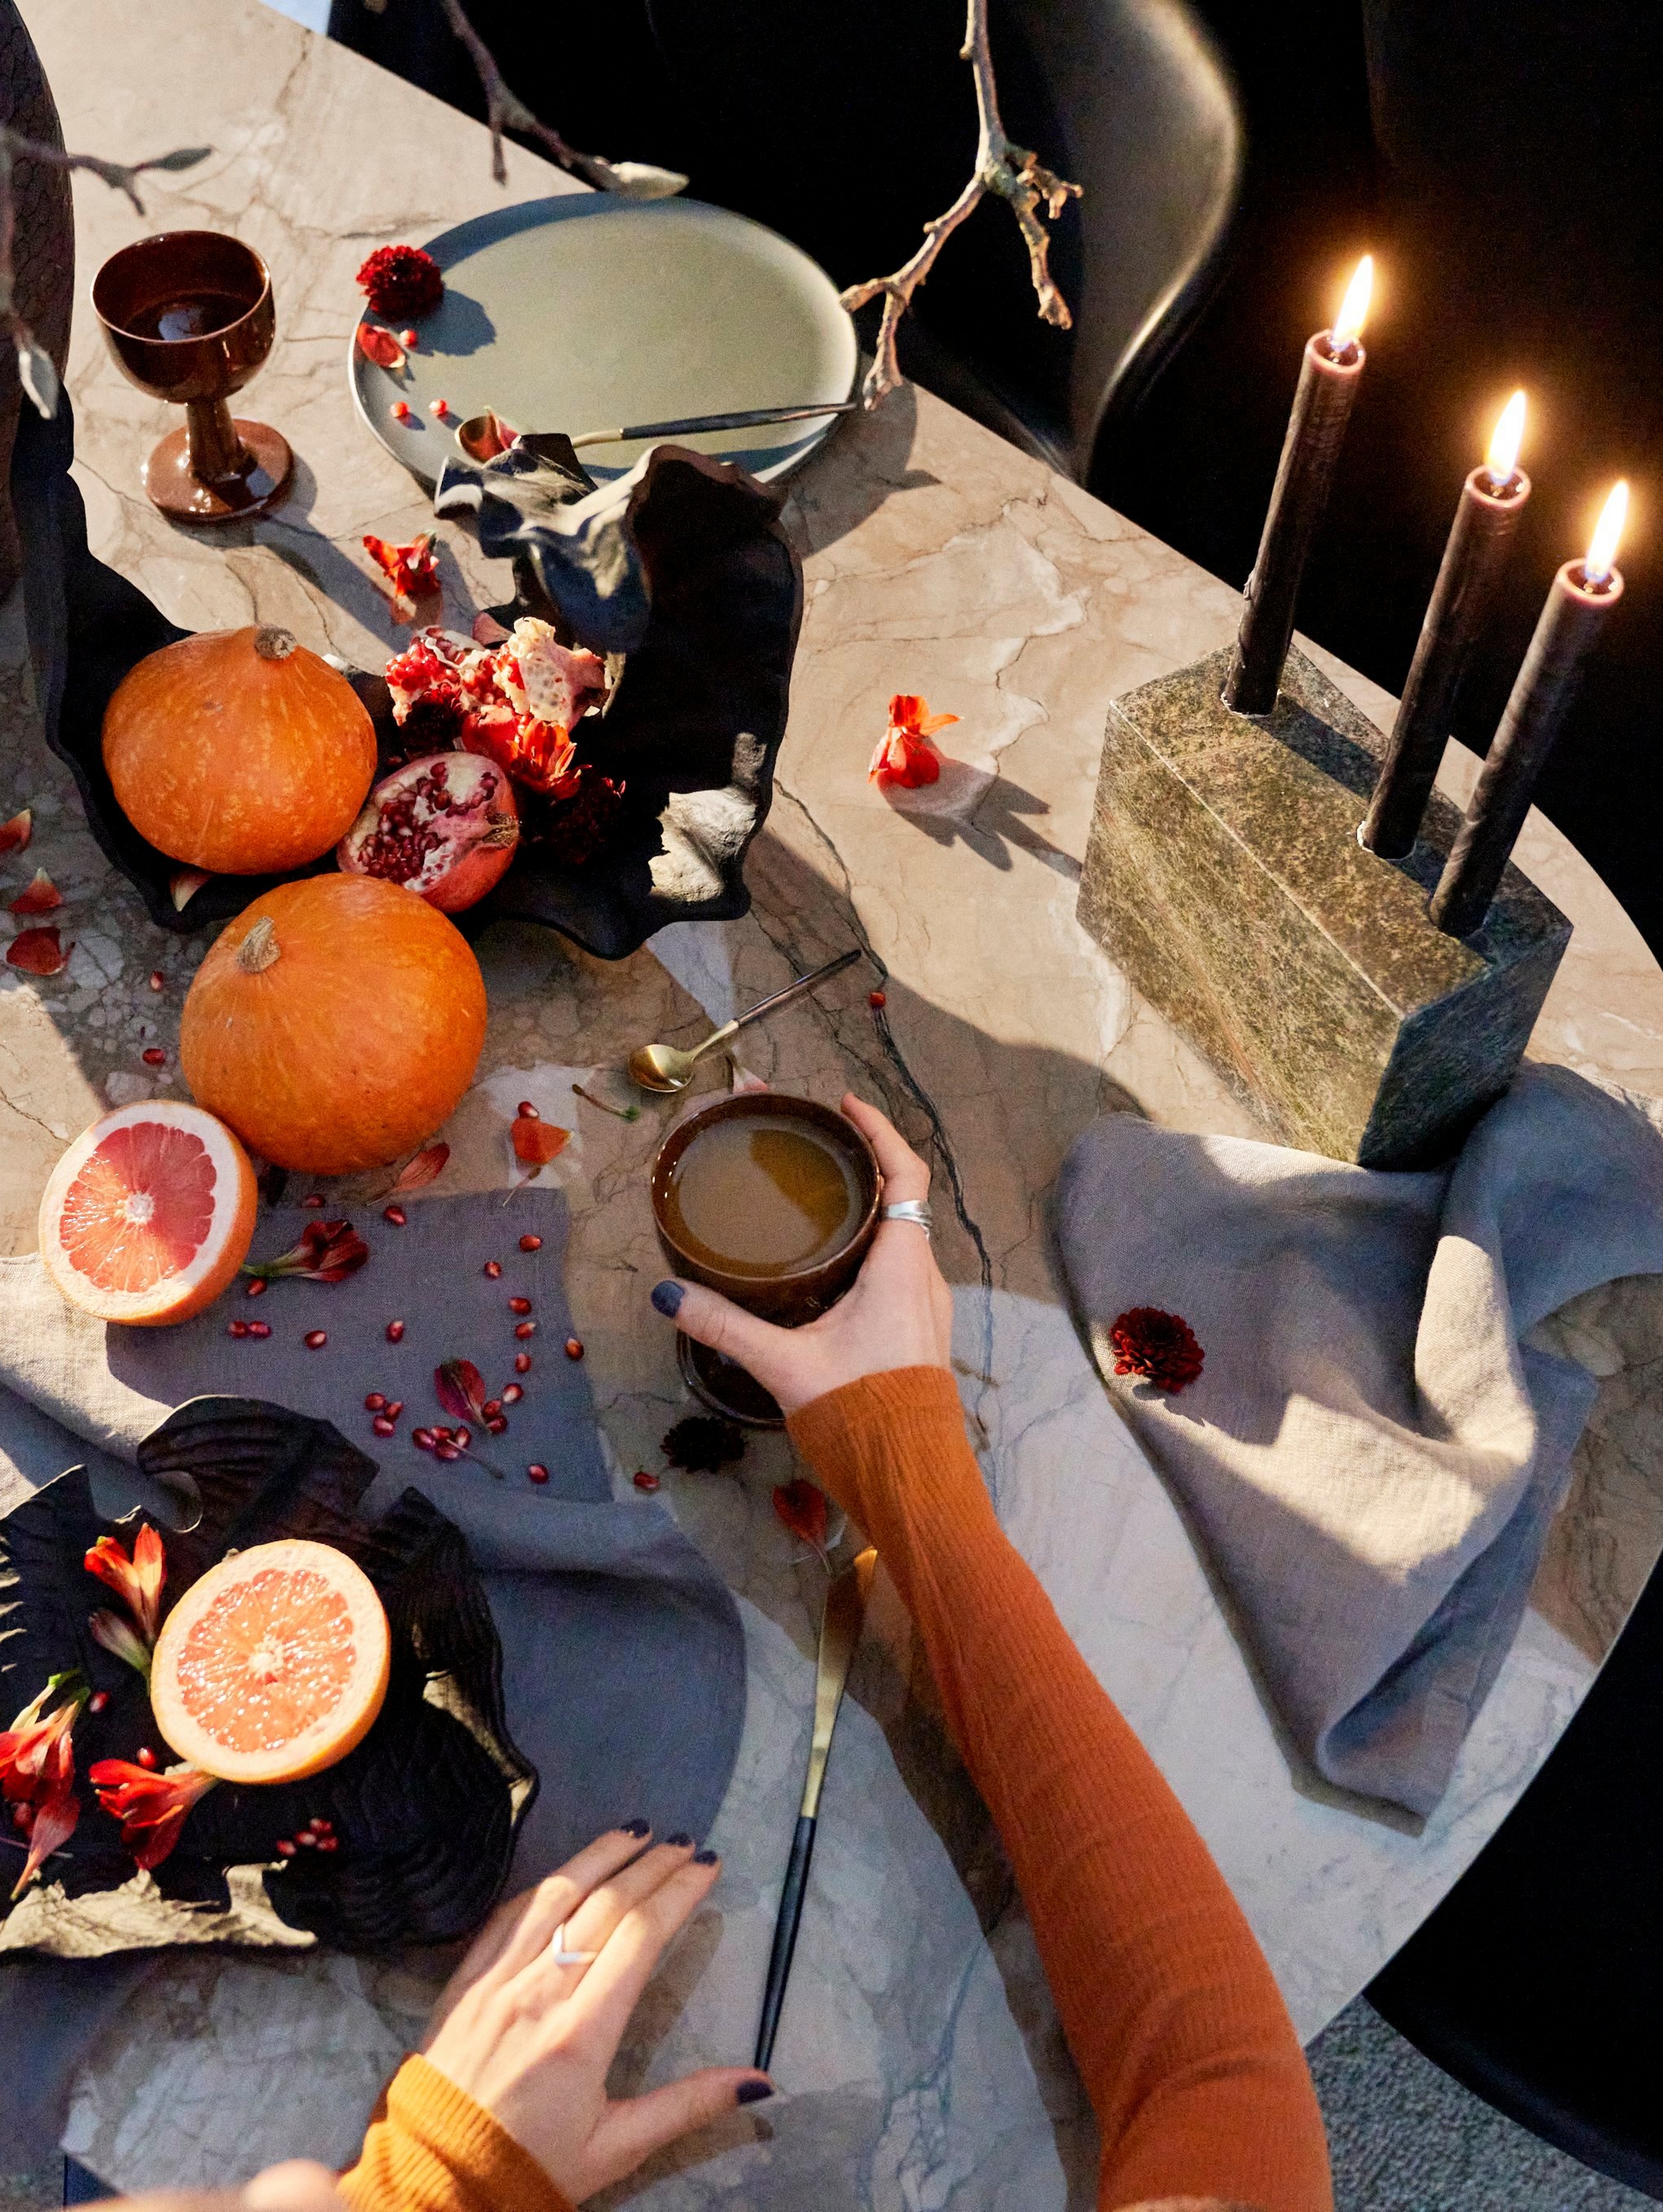 Woman sitting at festive dining table with candles and oranges.